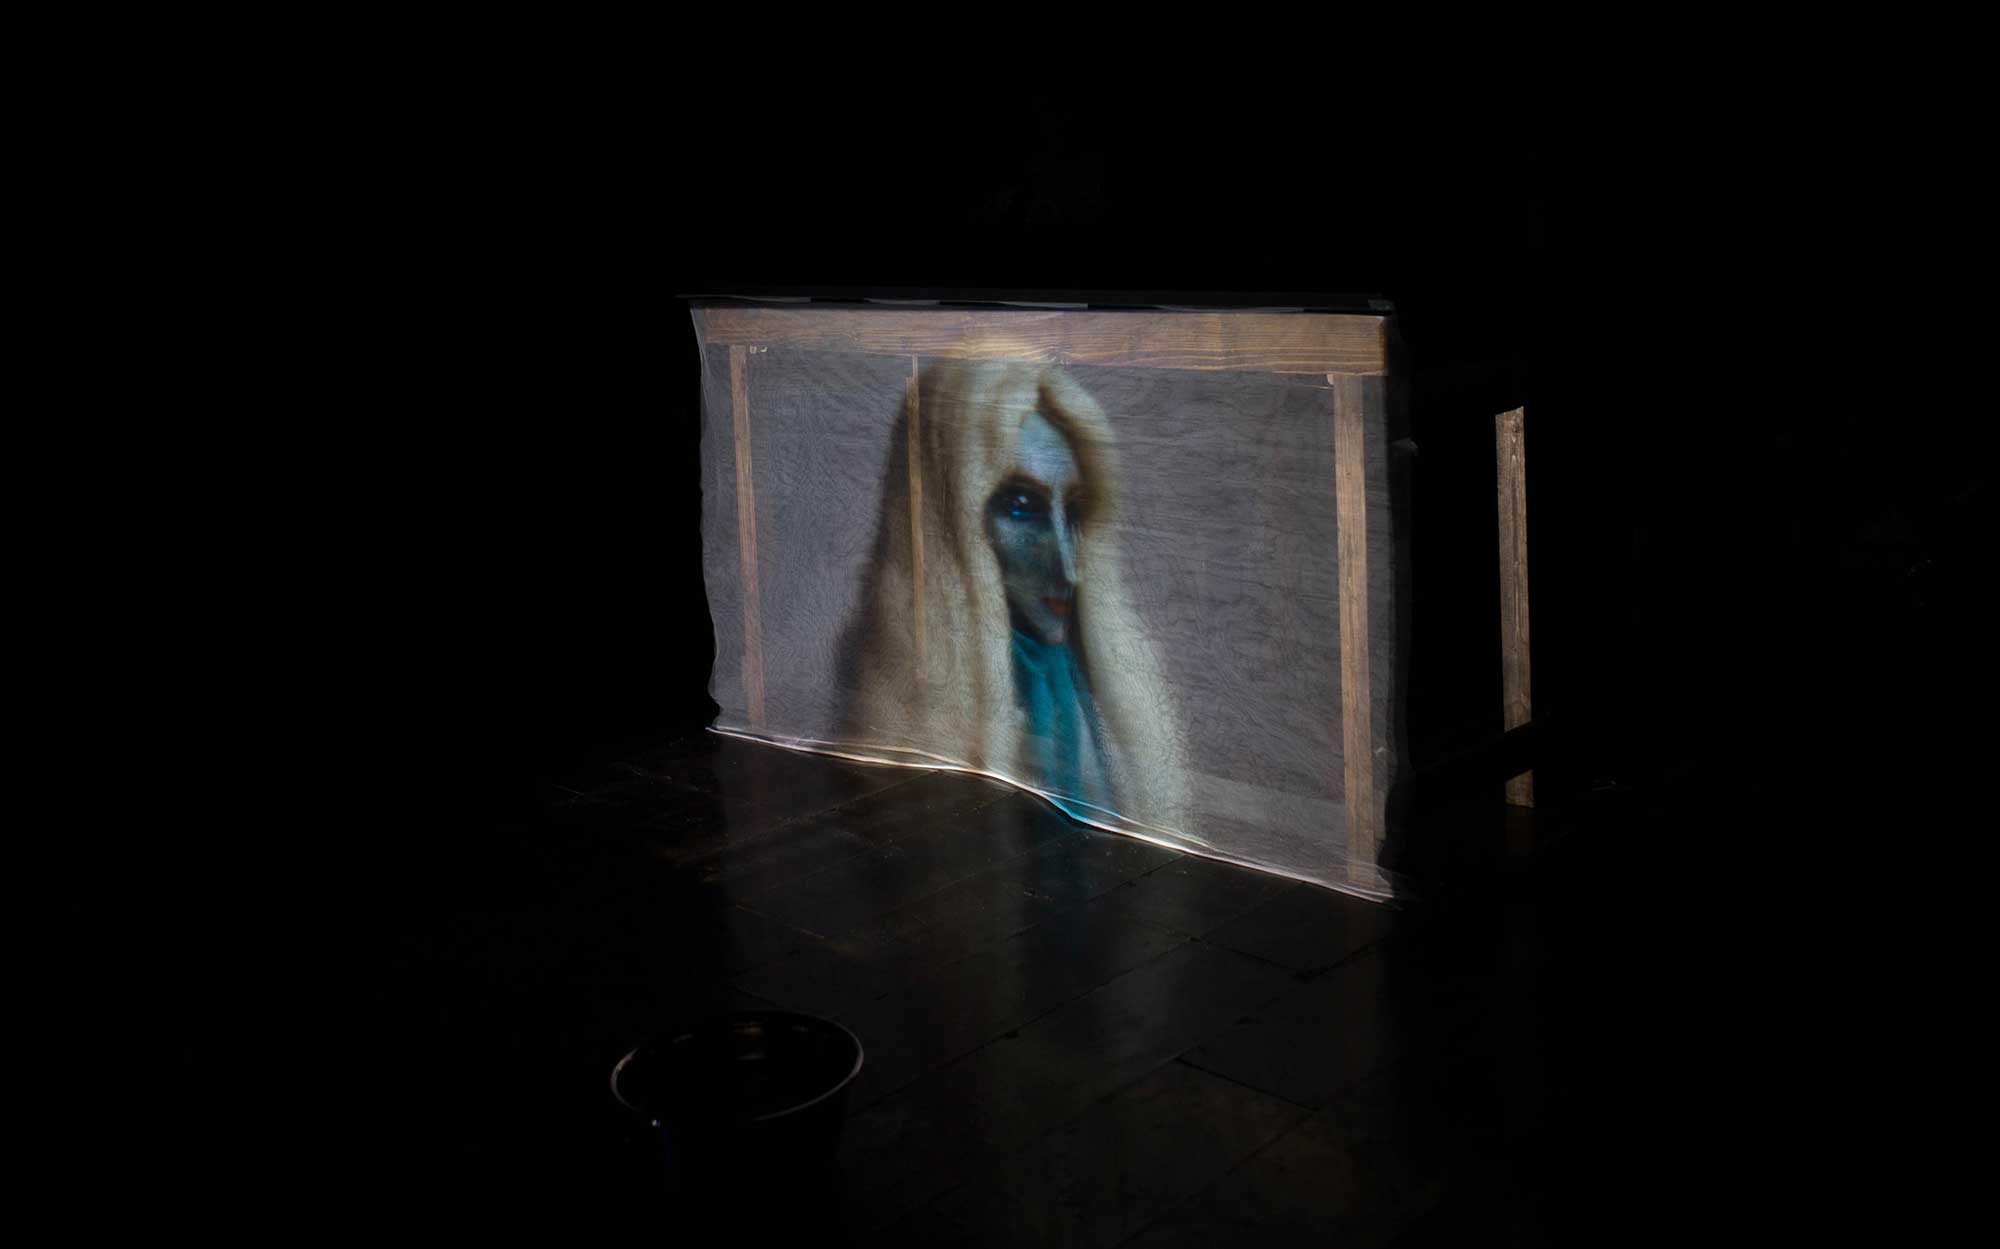 Shadow on water, a paper puppet theatre